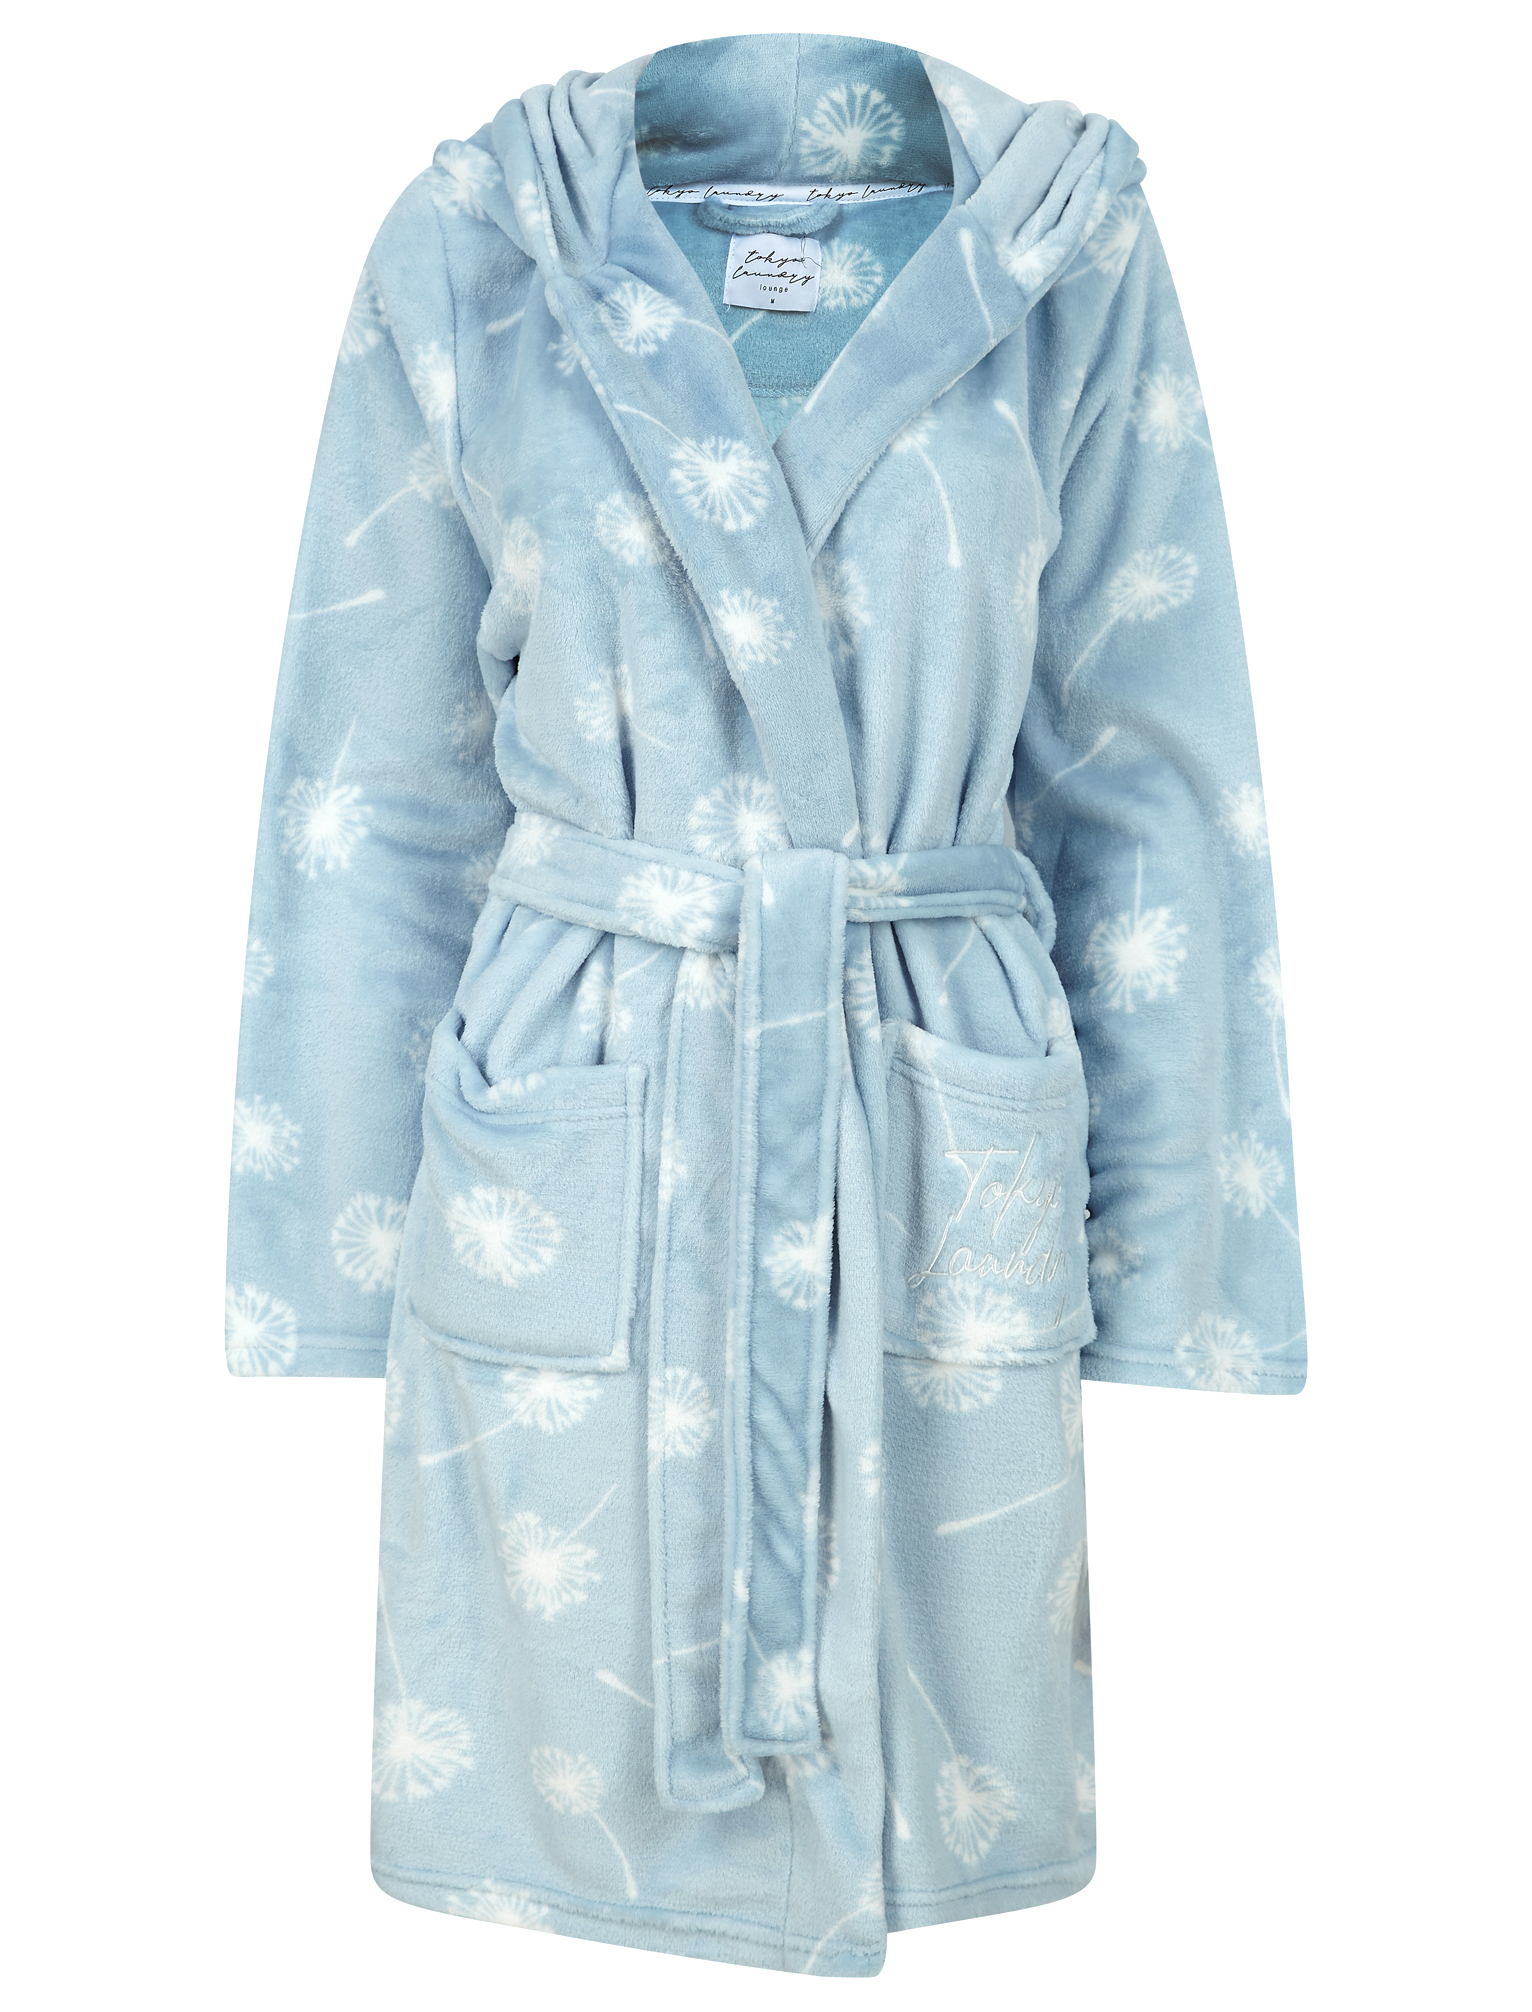 Women's Harry Potter Dressing Gown £18 @ Asda George